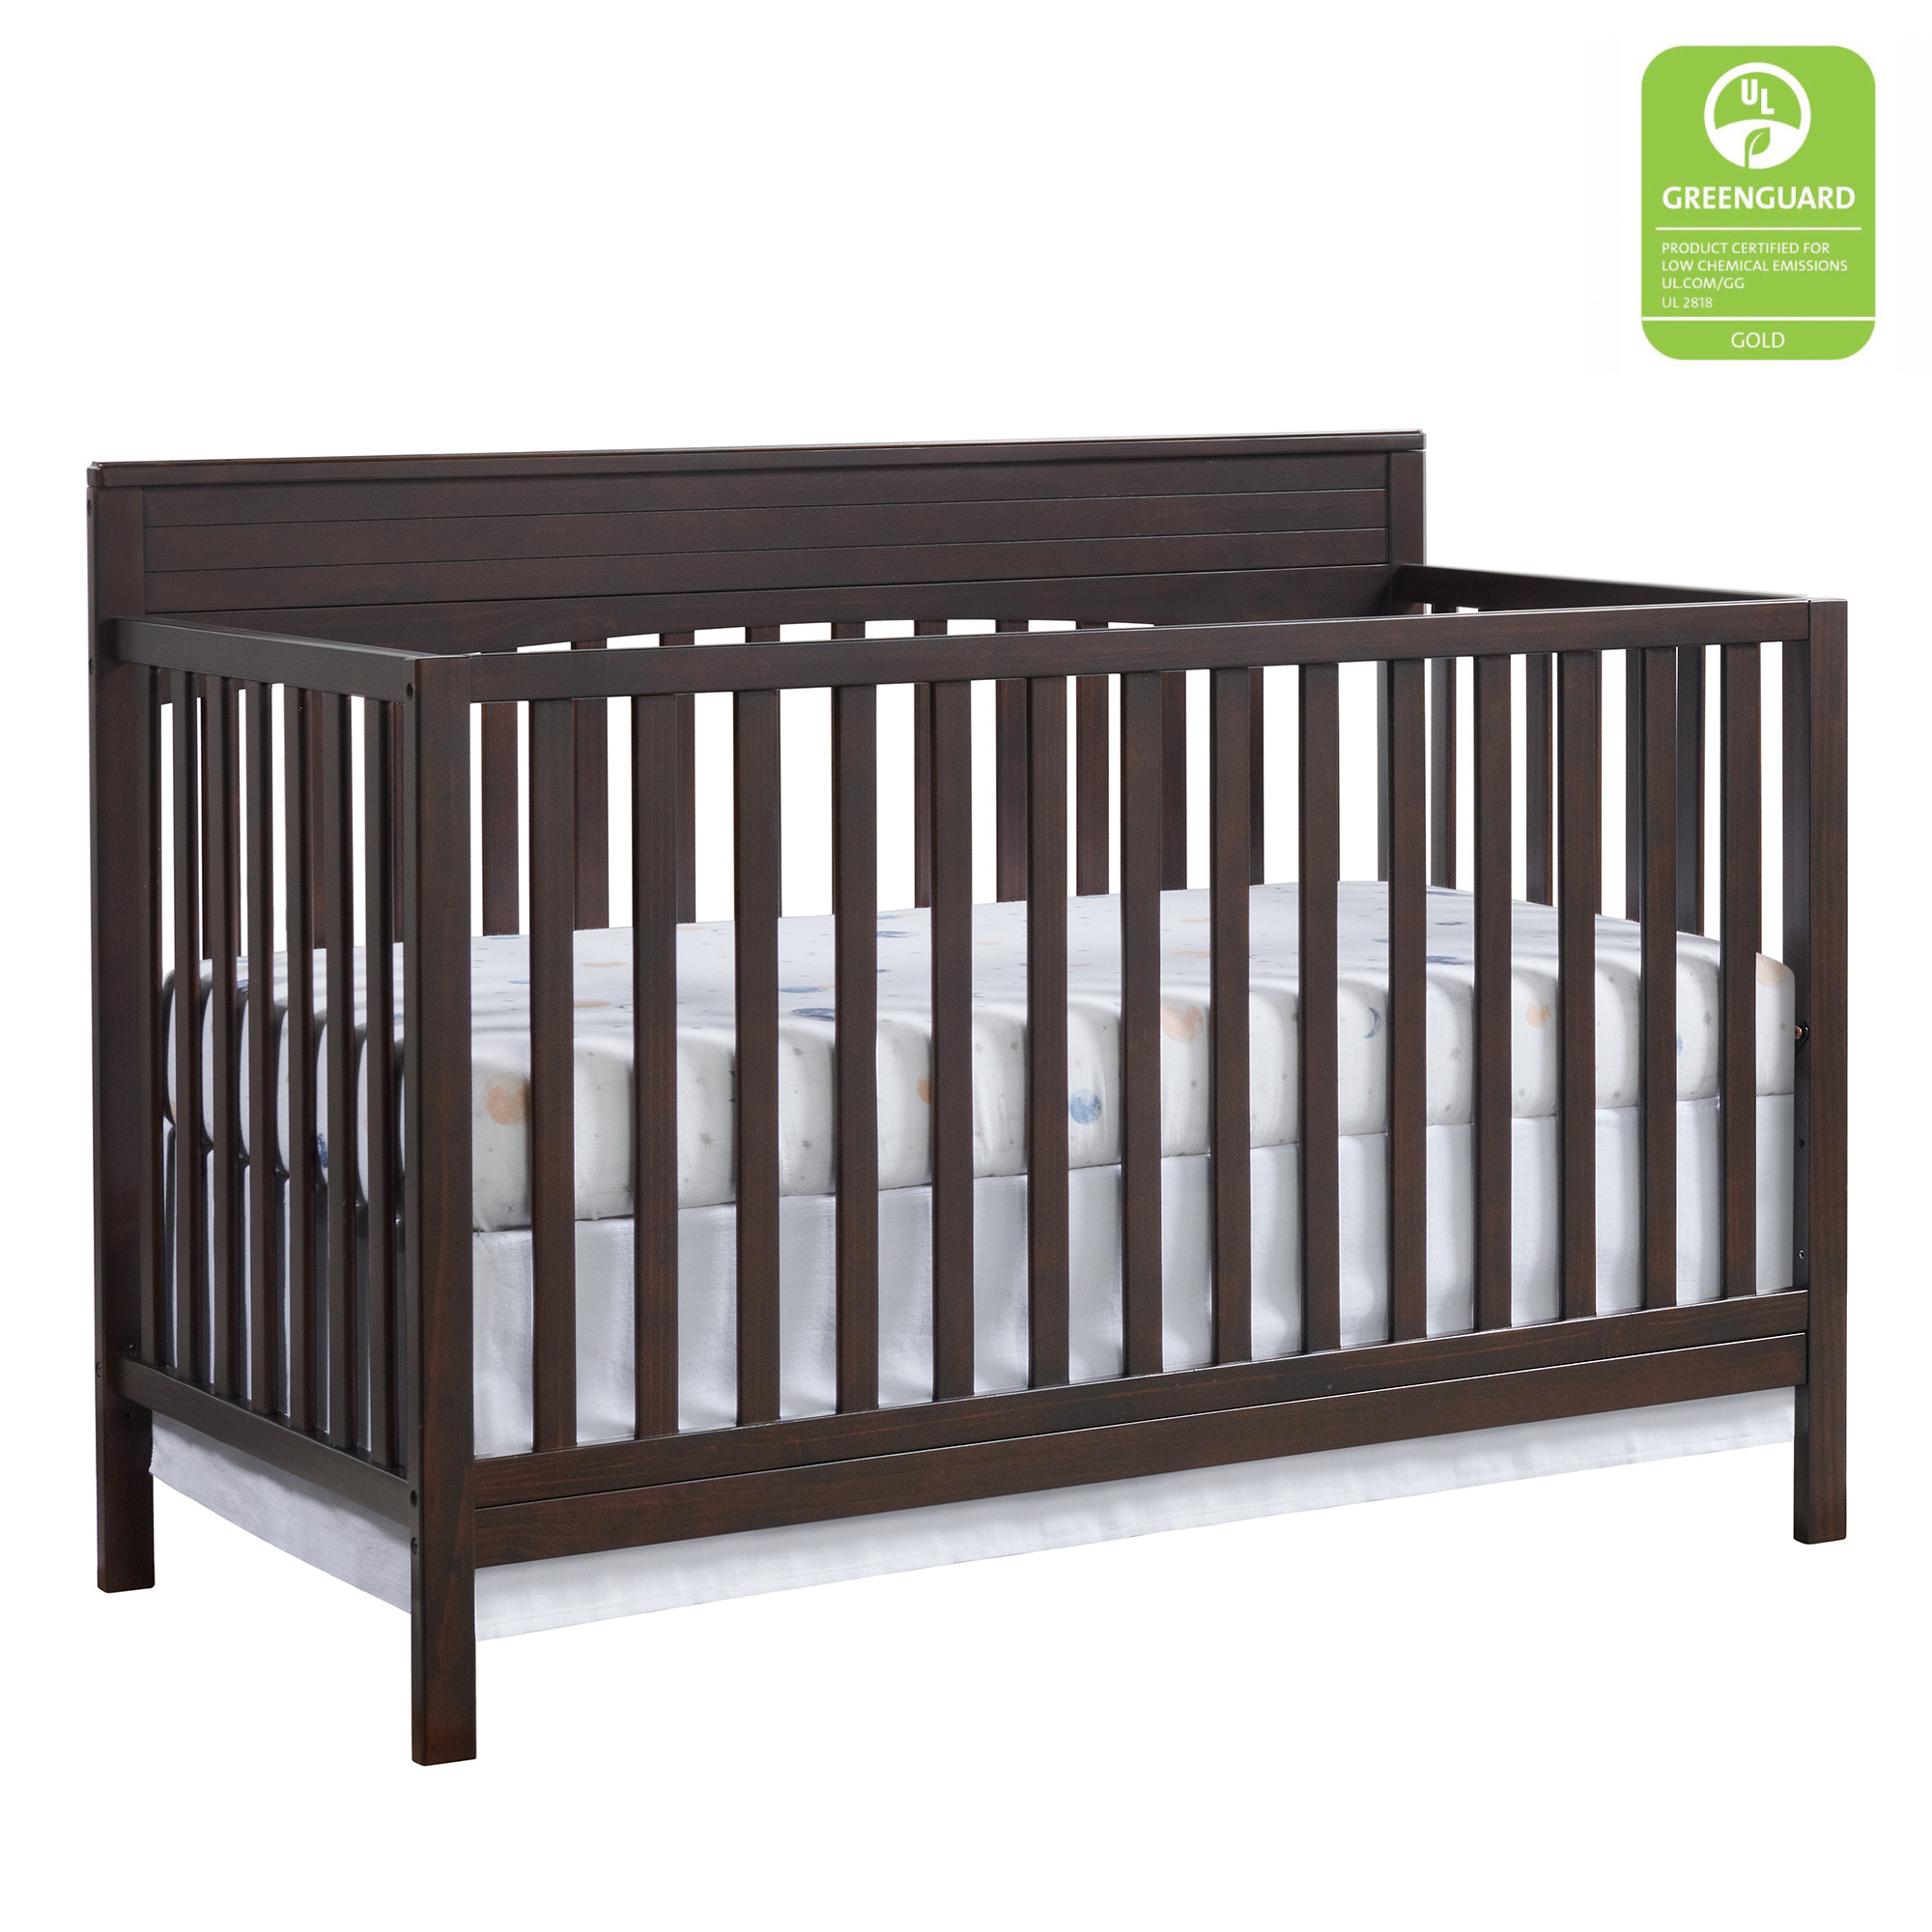 Oxford Baby Harper 4-in-1 Convertible Crib, Espresso Brown, GREENGUARD Gold Certified, Wooden Crib - image 1 of 11